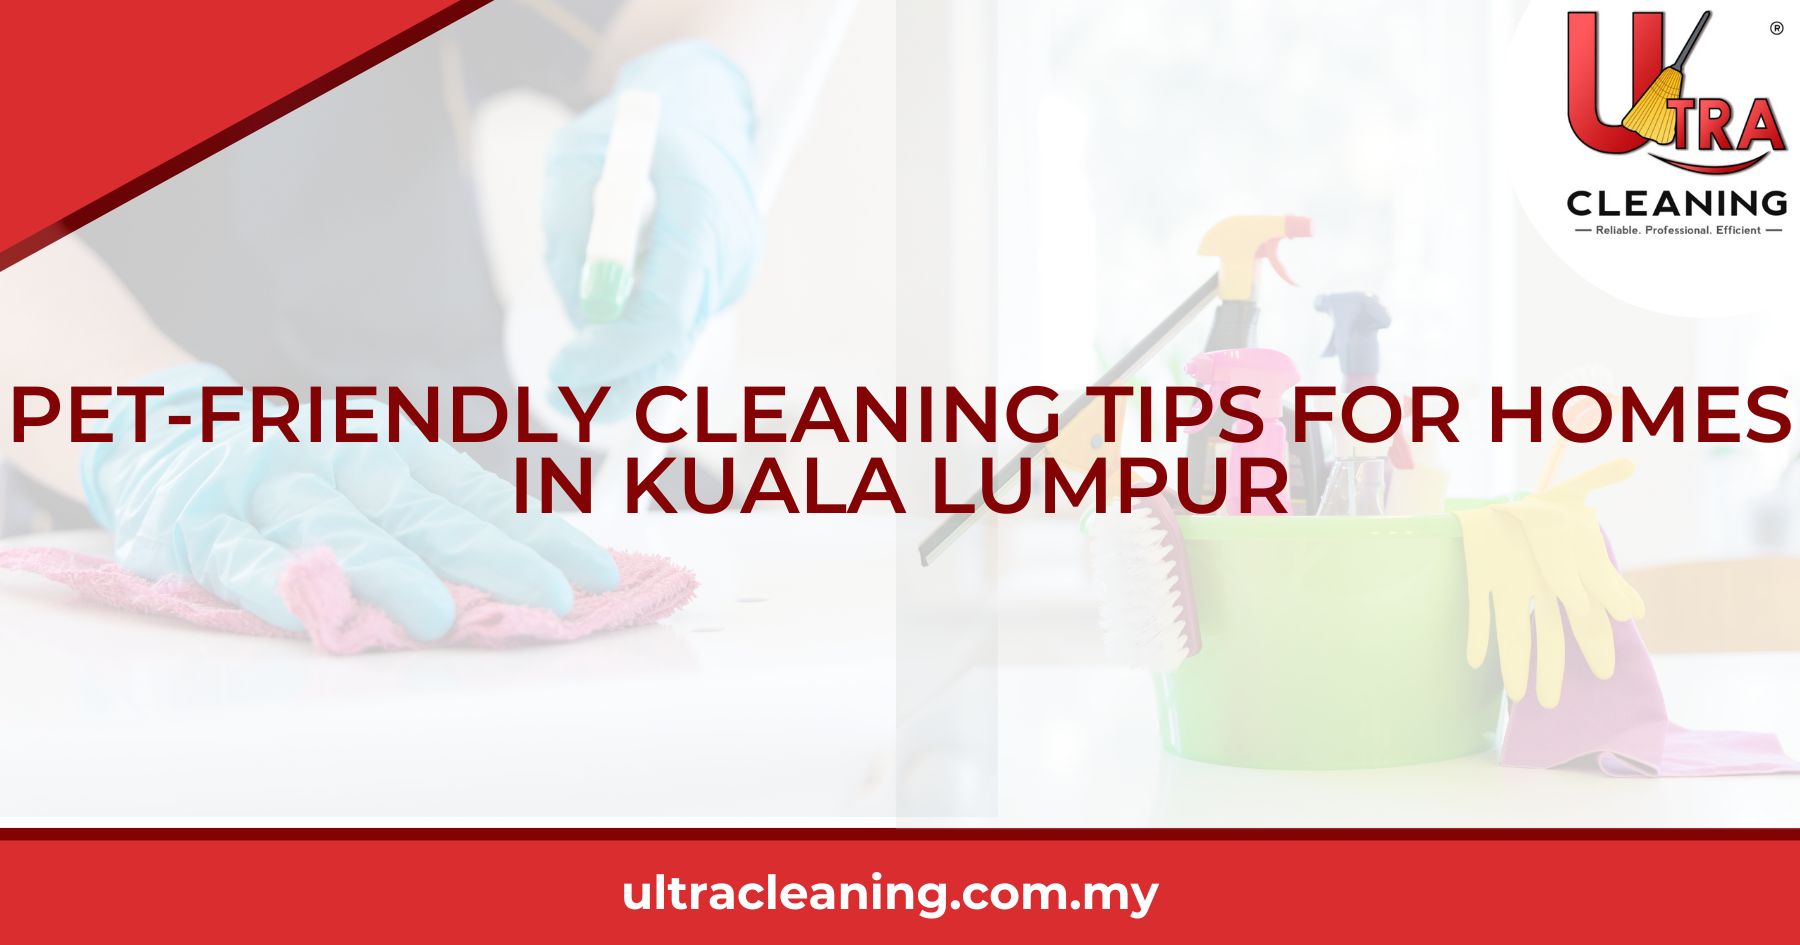 PET-FRIENDLY CLEANING TIPS FOR HOMES IN KUALA LUMPUR